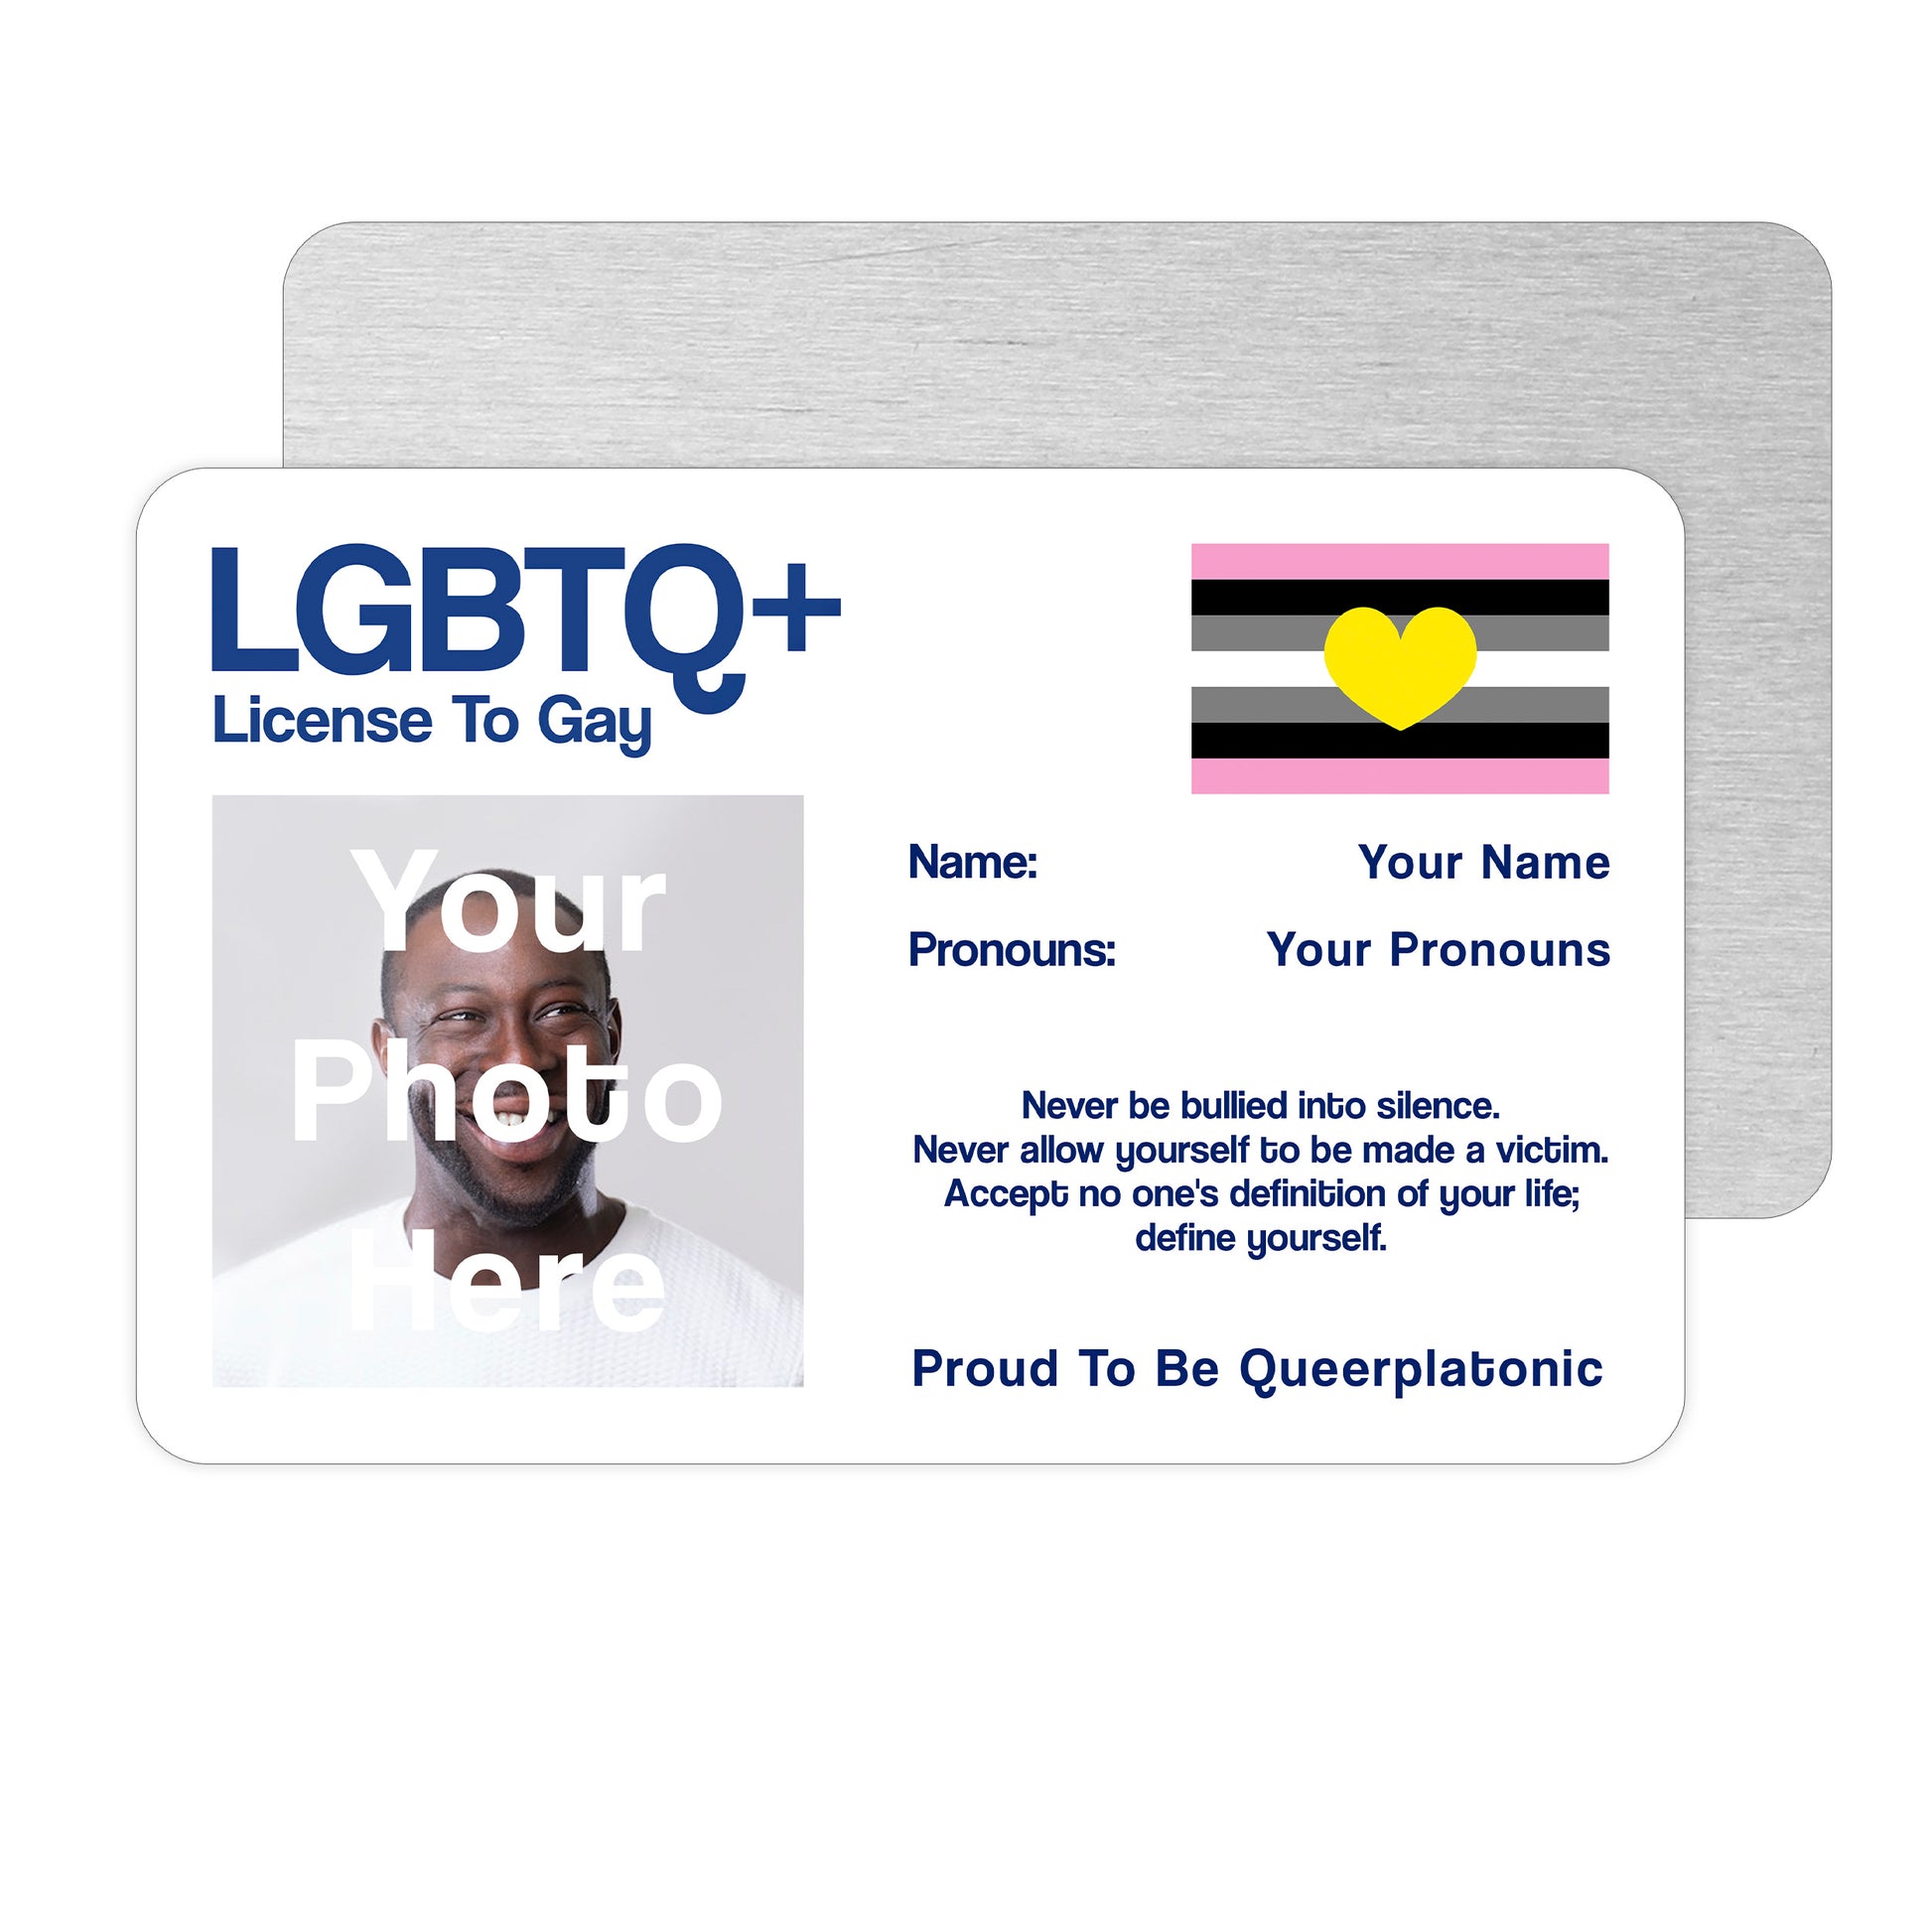 Queerplatonic license to gay aluminium wallet card personalised with your name, pronouns and photo